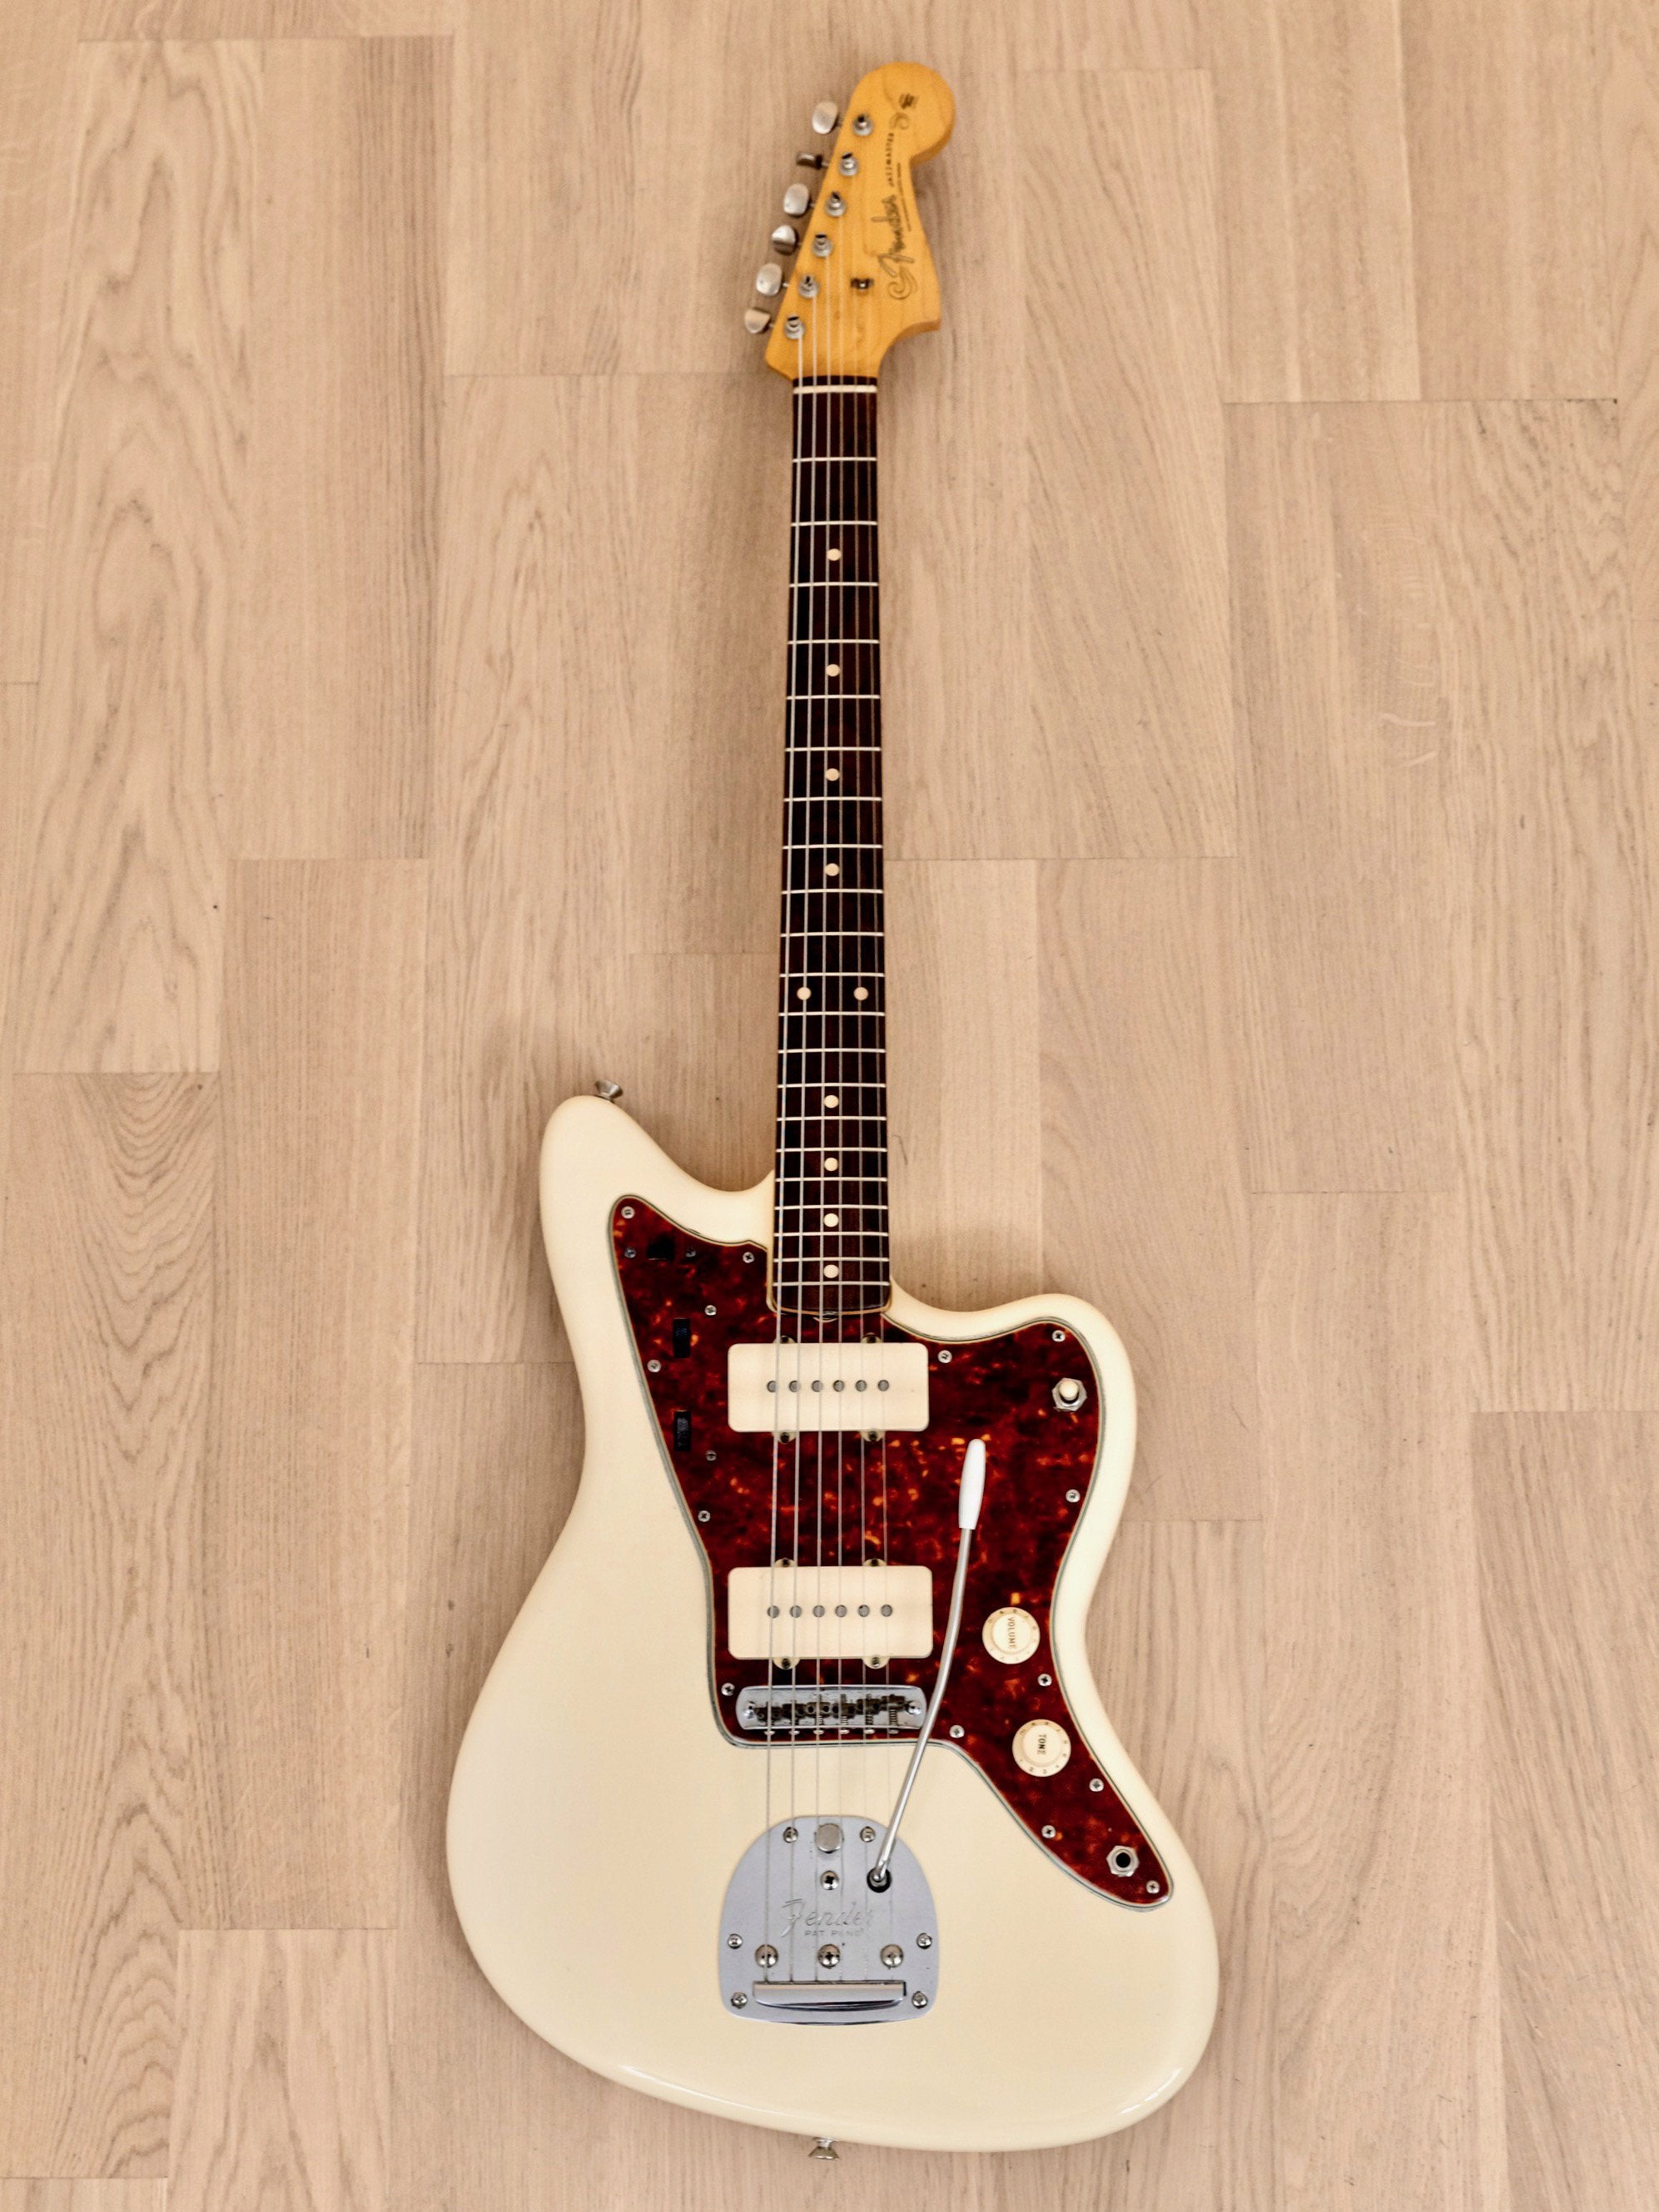 1959 Fender Jazzmaster Vintage Pre-CBS Offset Electric Guitar Olympic White w/ Case